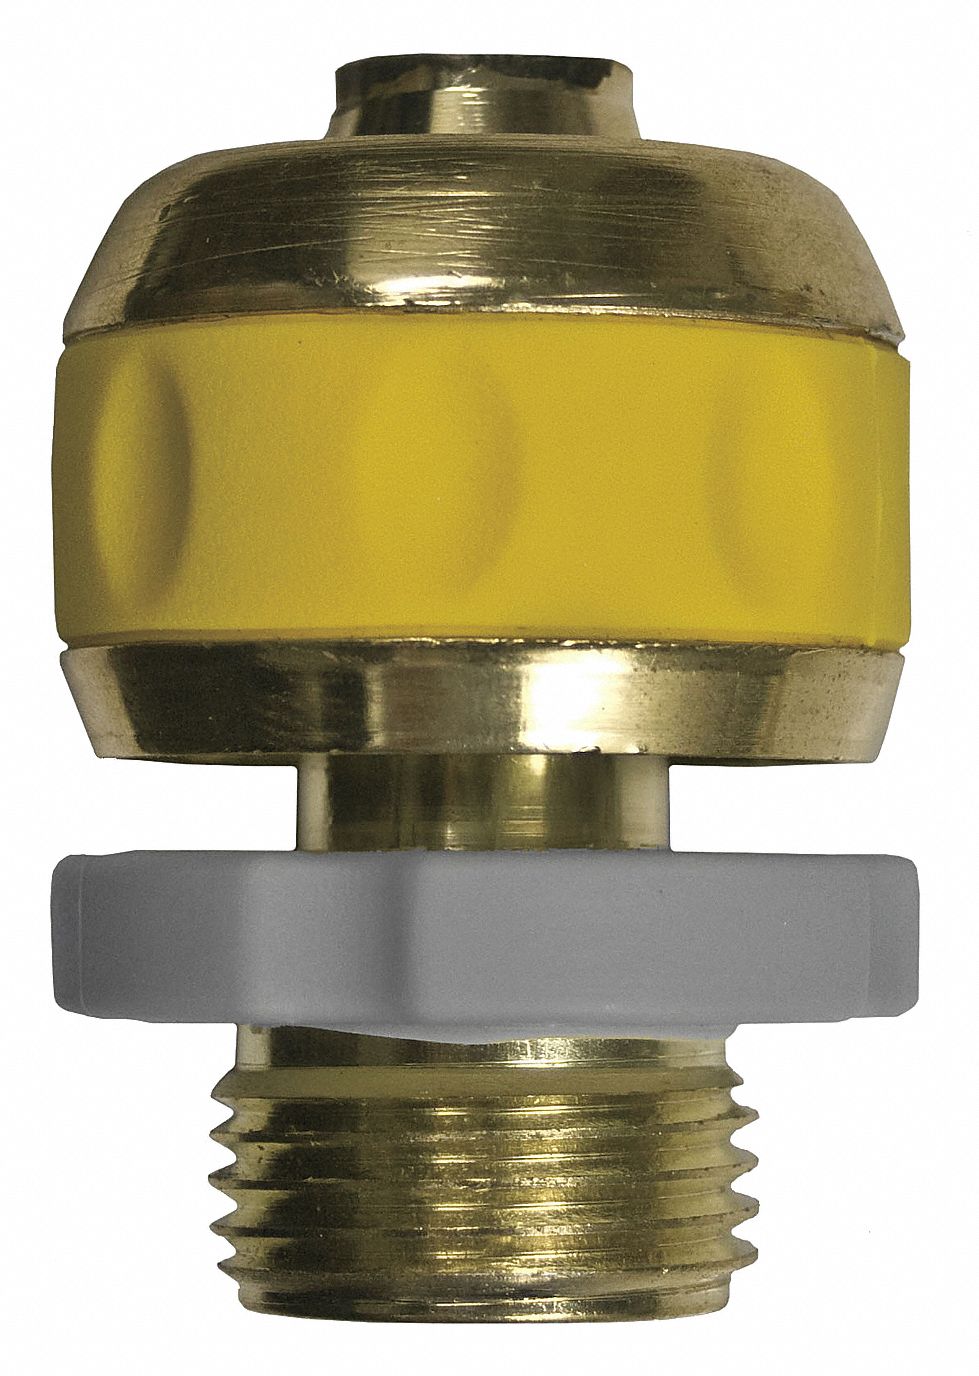 Garden Hose Repair Fitting: For 5/8 in_3/4 in Hose I.D., GHT x GHT, Male x Female, Rigid, GHT